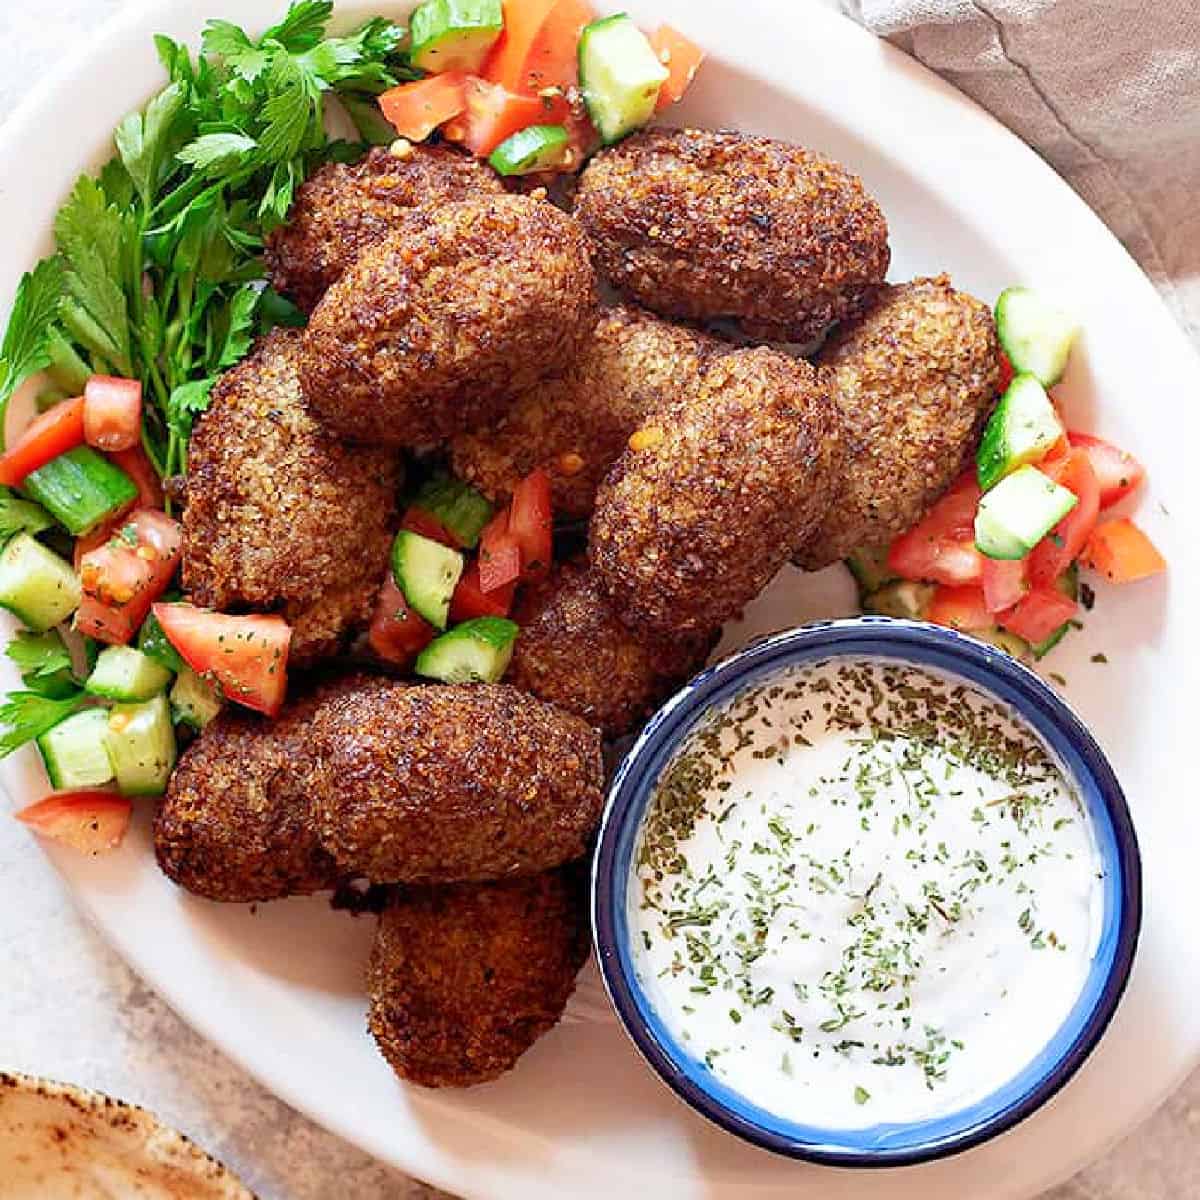 Kibbeh is a Middle Eastern meatball dish containing bulgur, ground beef and warm spices. A great kibbeh is characterized by a tender shell stuffed with delicious spiced filling. Learn how to perfect this classic of Middle Eastern cuisine with our step-by-step tutorial and video.
